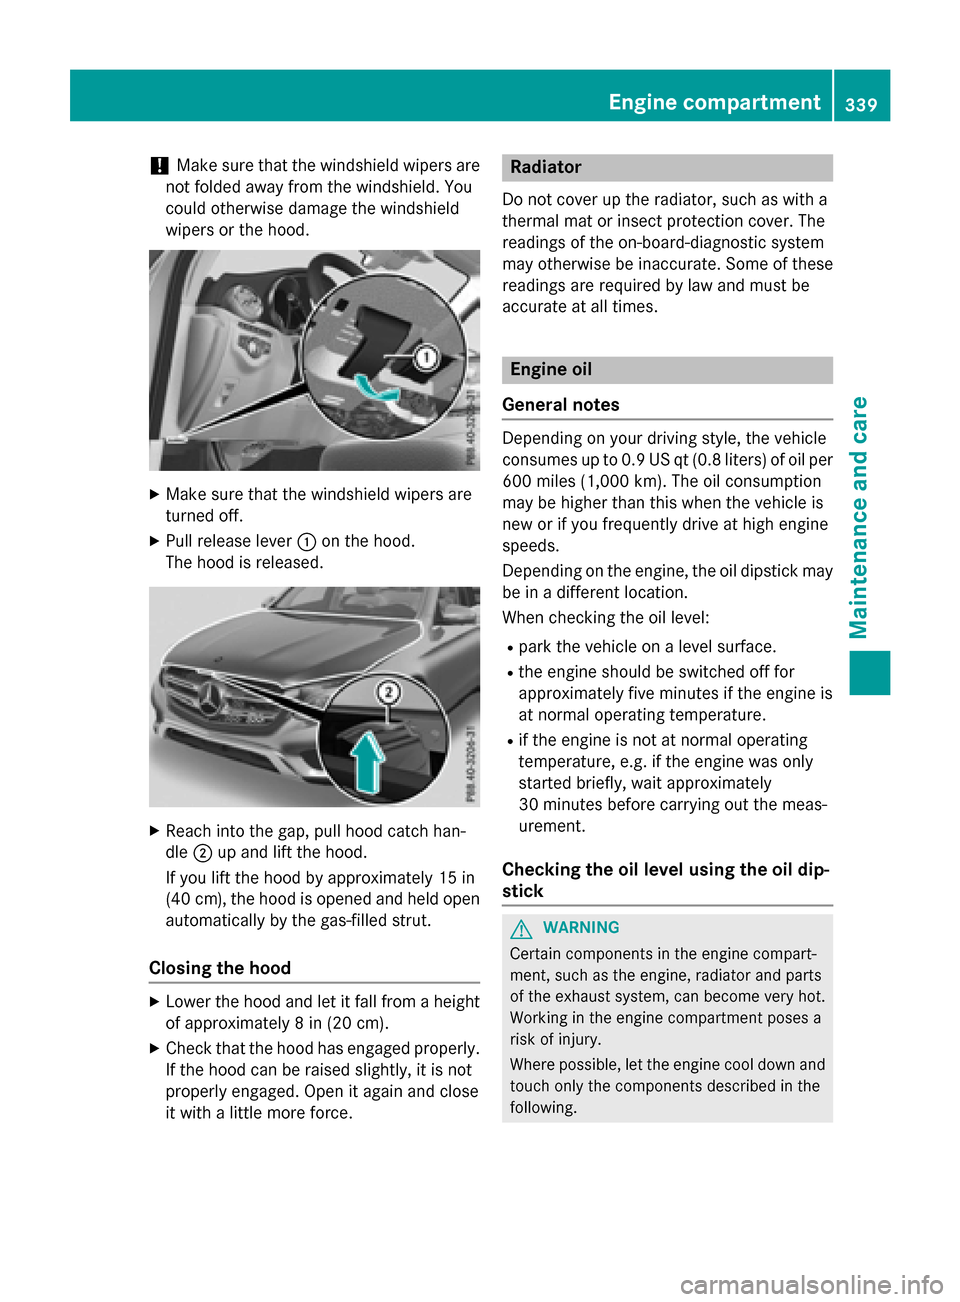 MERCEDES-BENZ GLC-Class 2016 X253 Owners Manual !Make sure that the windshield wipers are
not folded away from the windshield. You
could otherwise damage the windshield
wipers or the hood.
XMake sure that the windshield wipers are
turned off.
XPull